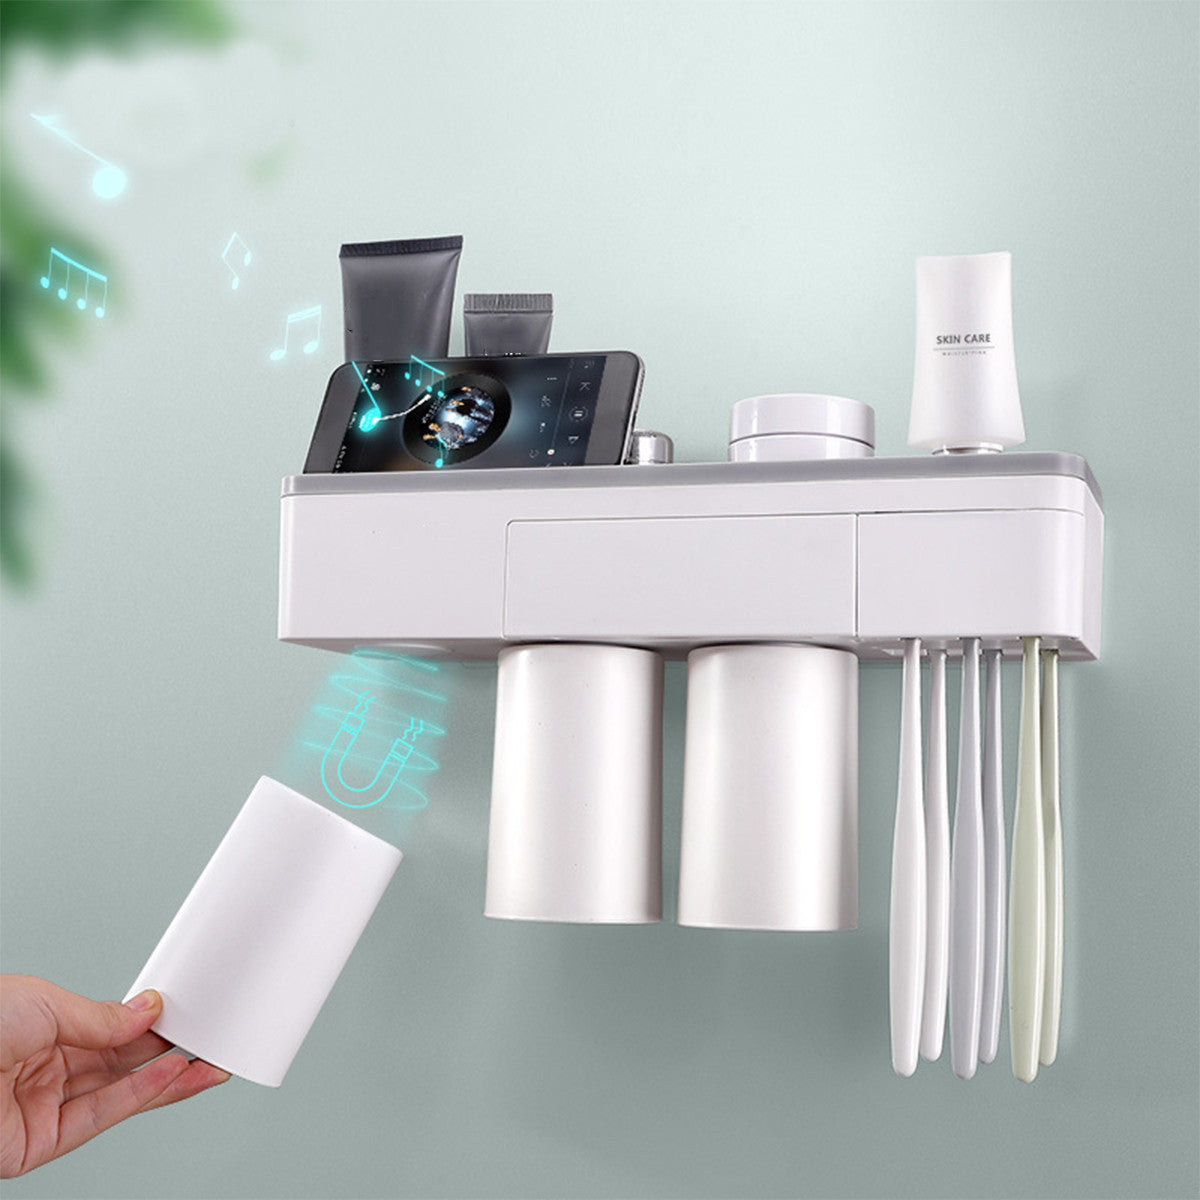 Wall Mounted Magnetic Toothbrush Holder Stand Organizer